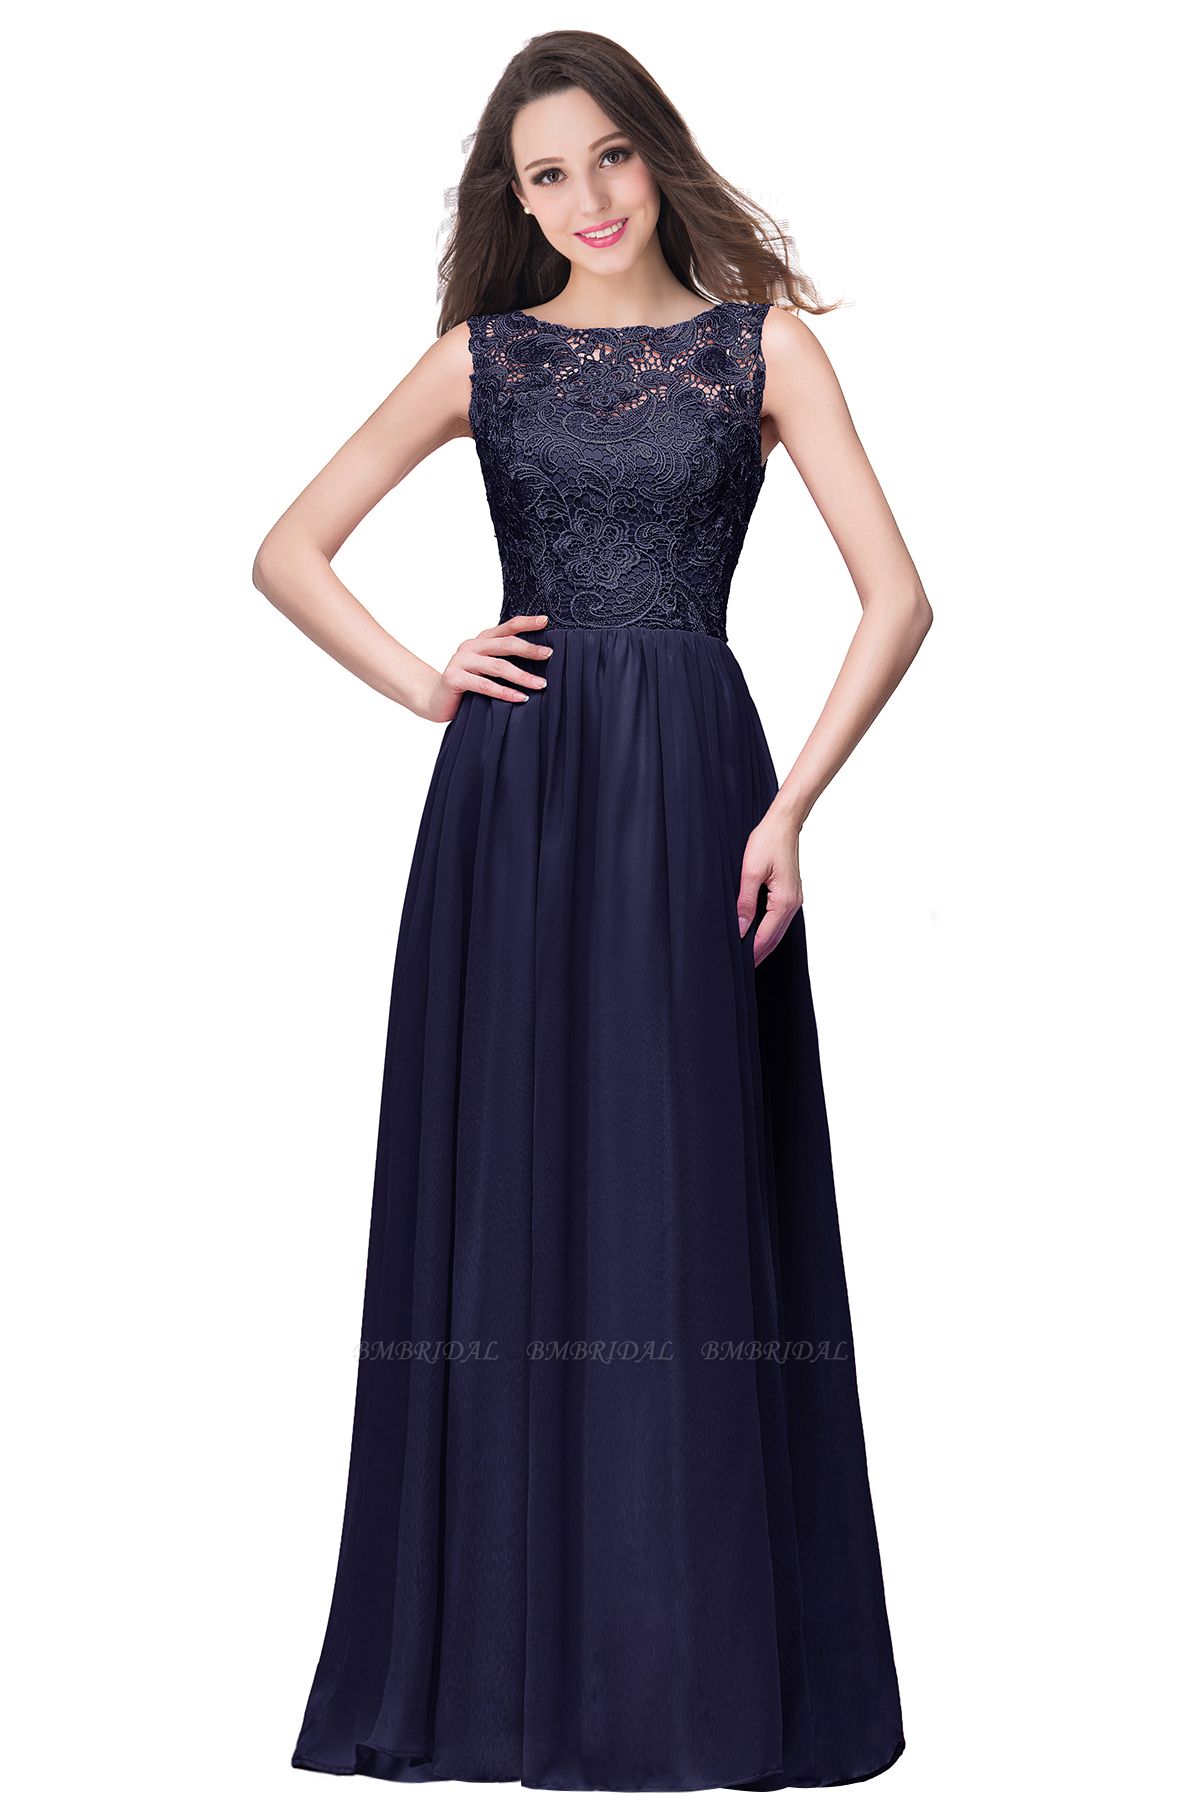 BMbridal Affordable A-line Chiffon Crew Lace Navy Long Bridesmaid Dresses In Stock